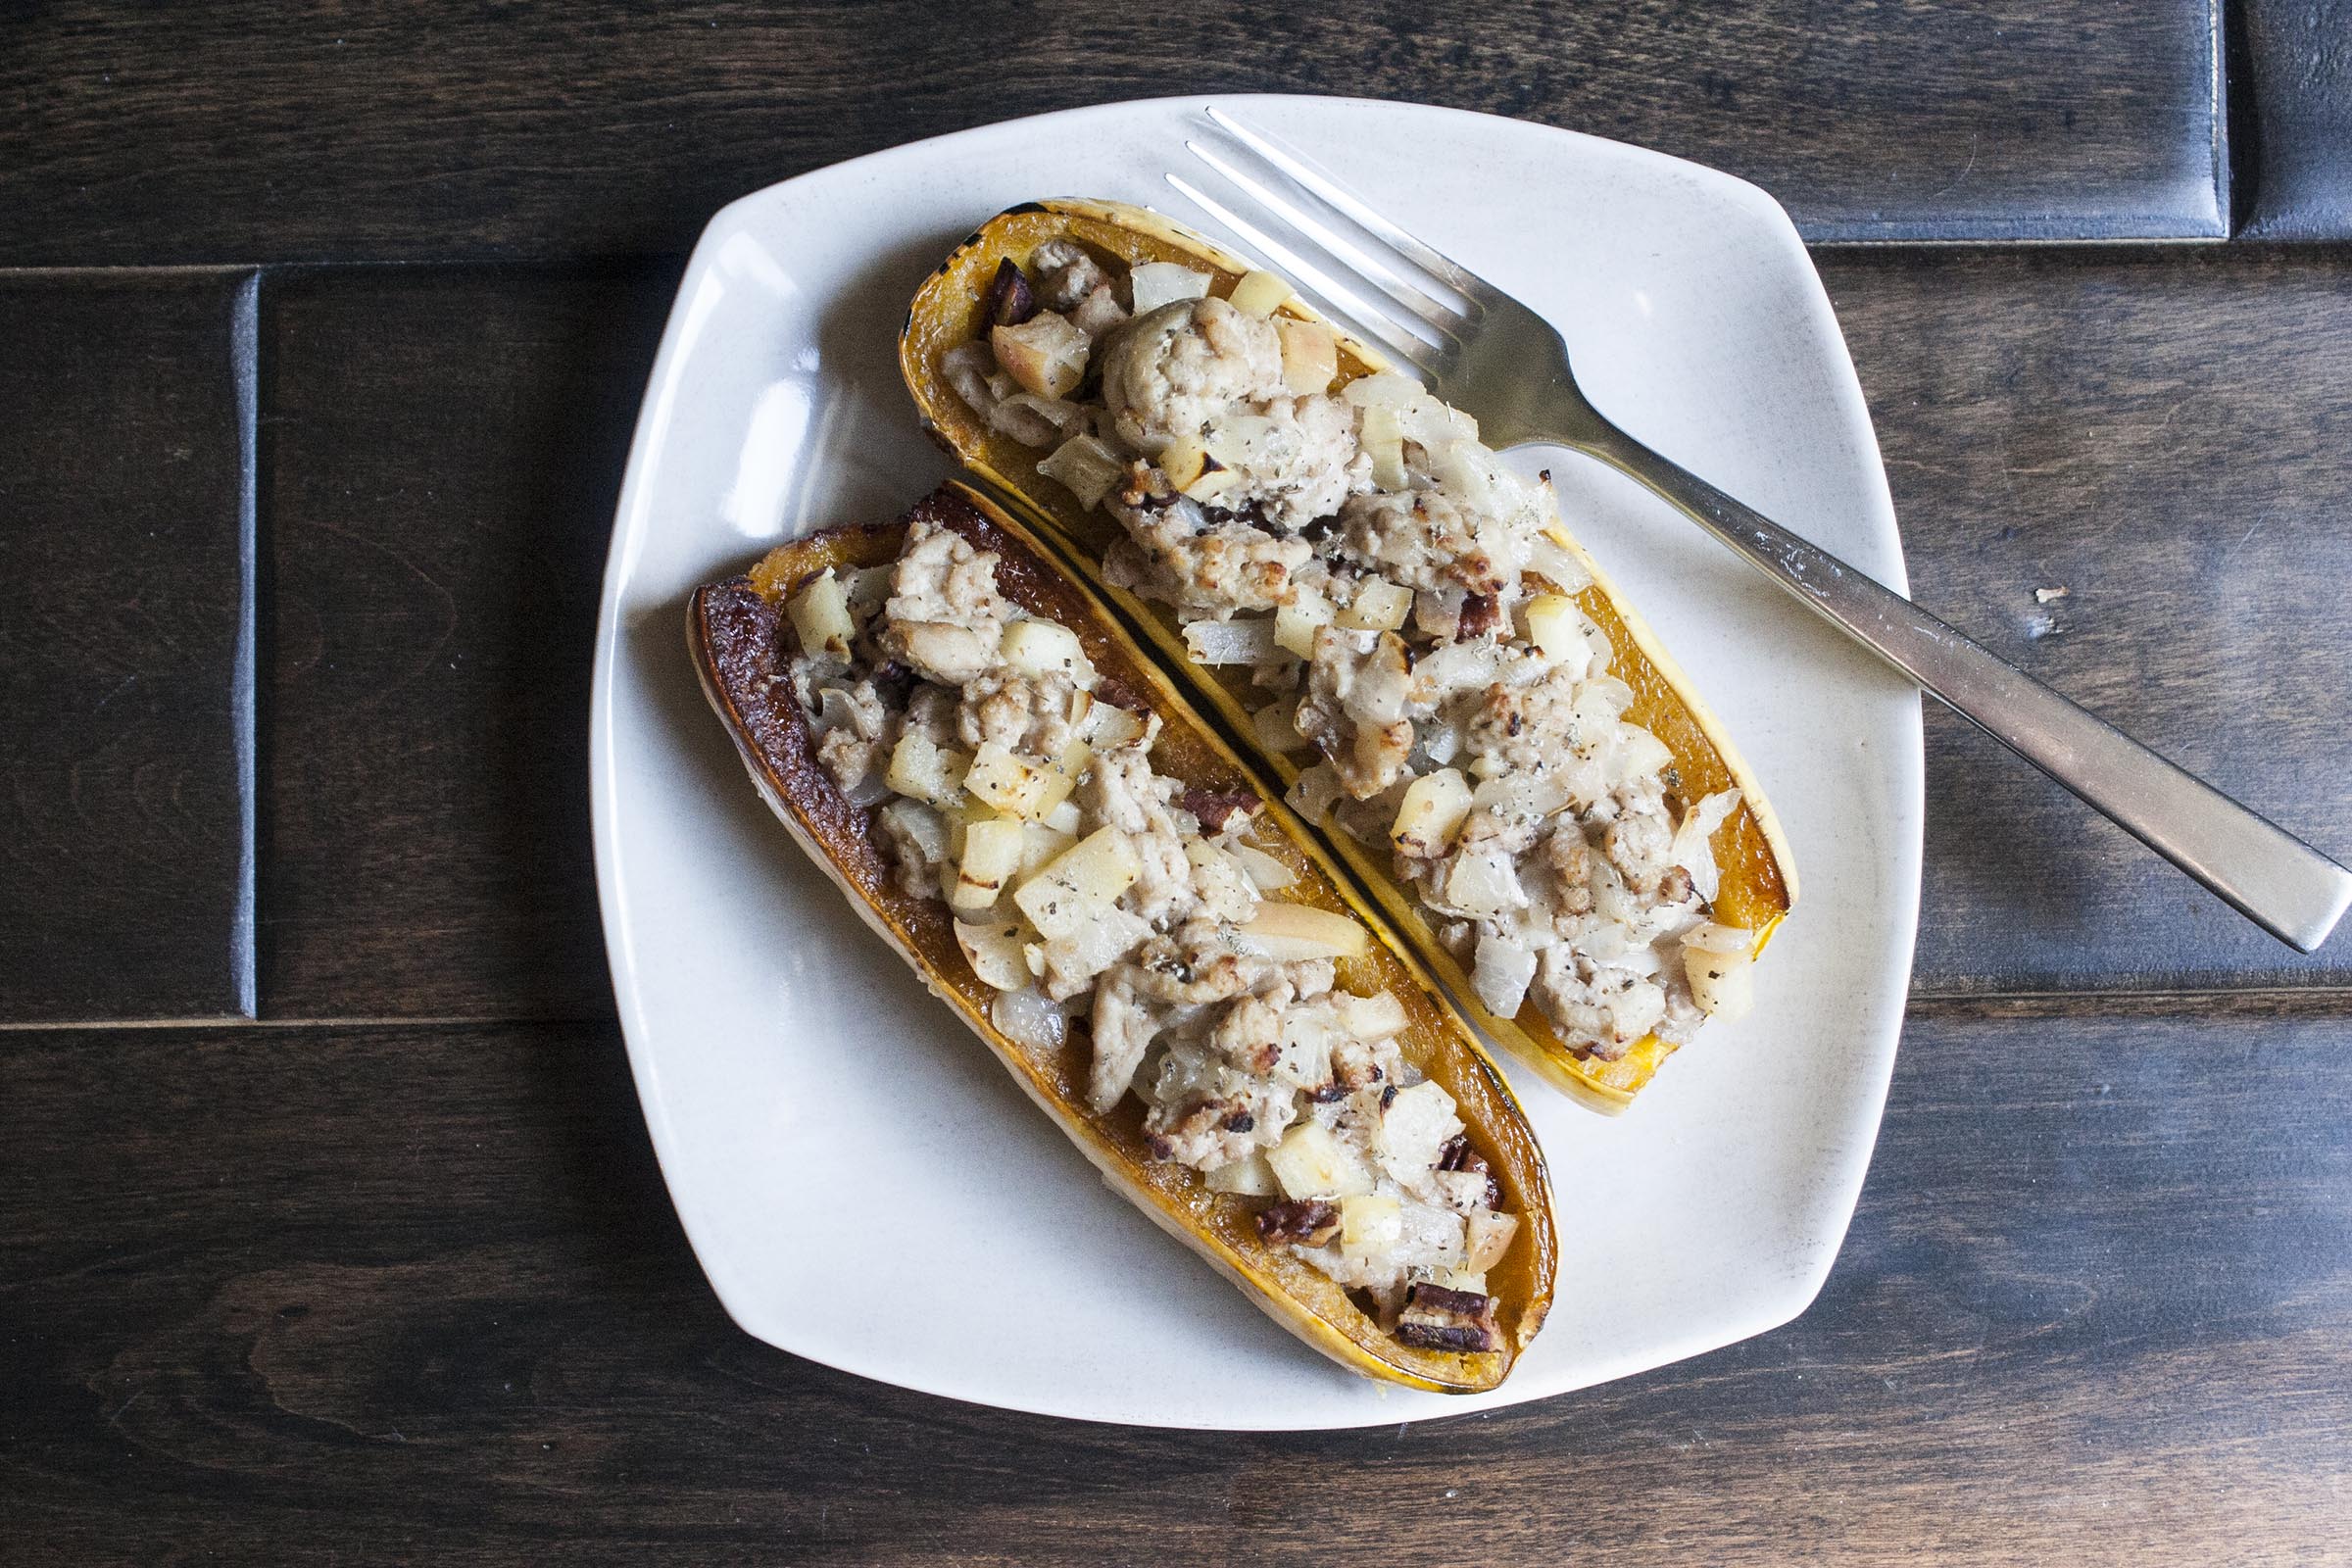 Delicata Squash is roasted until golden, and stuffed with a mixture of ground turkey, apples and pecans.